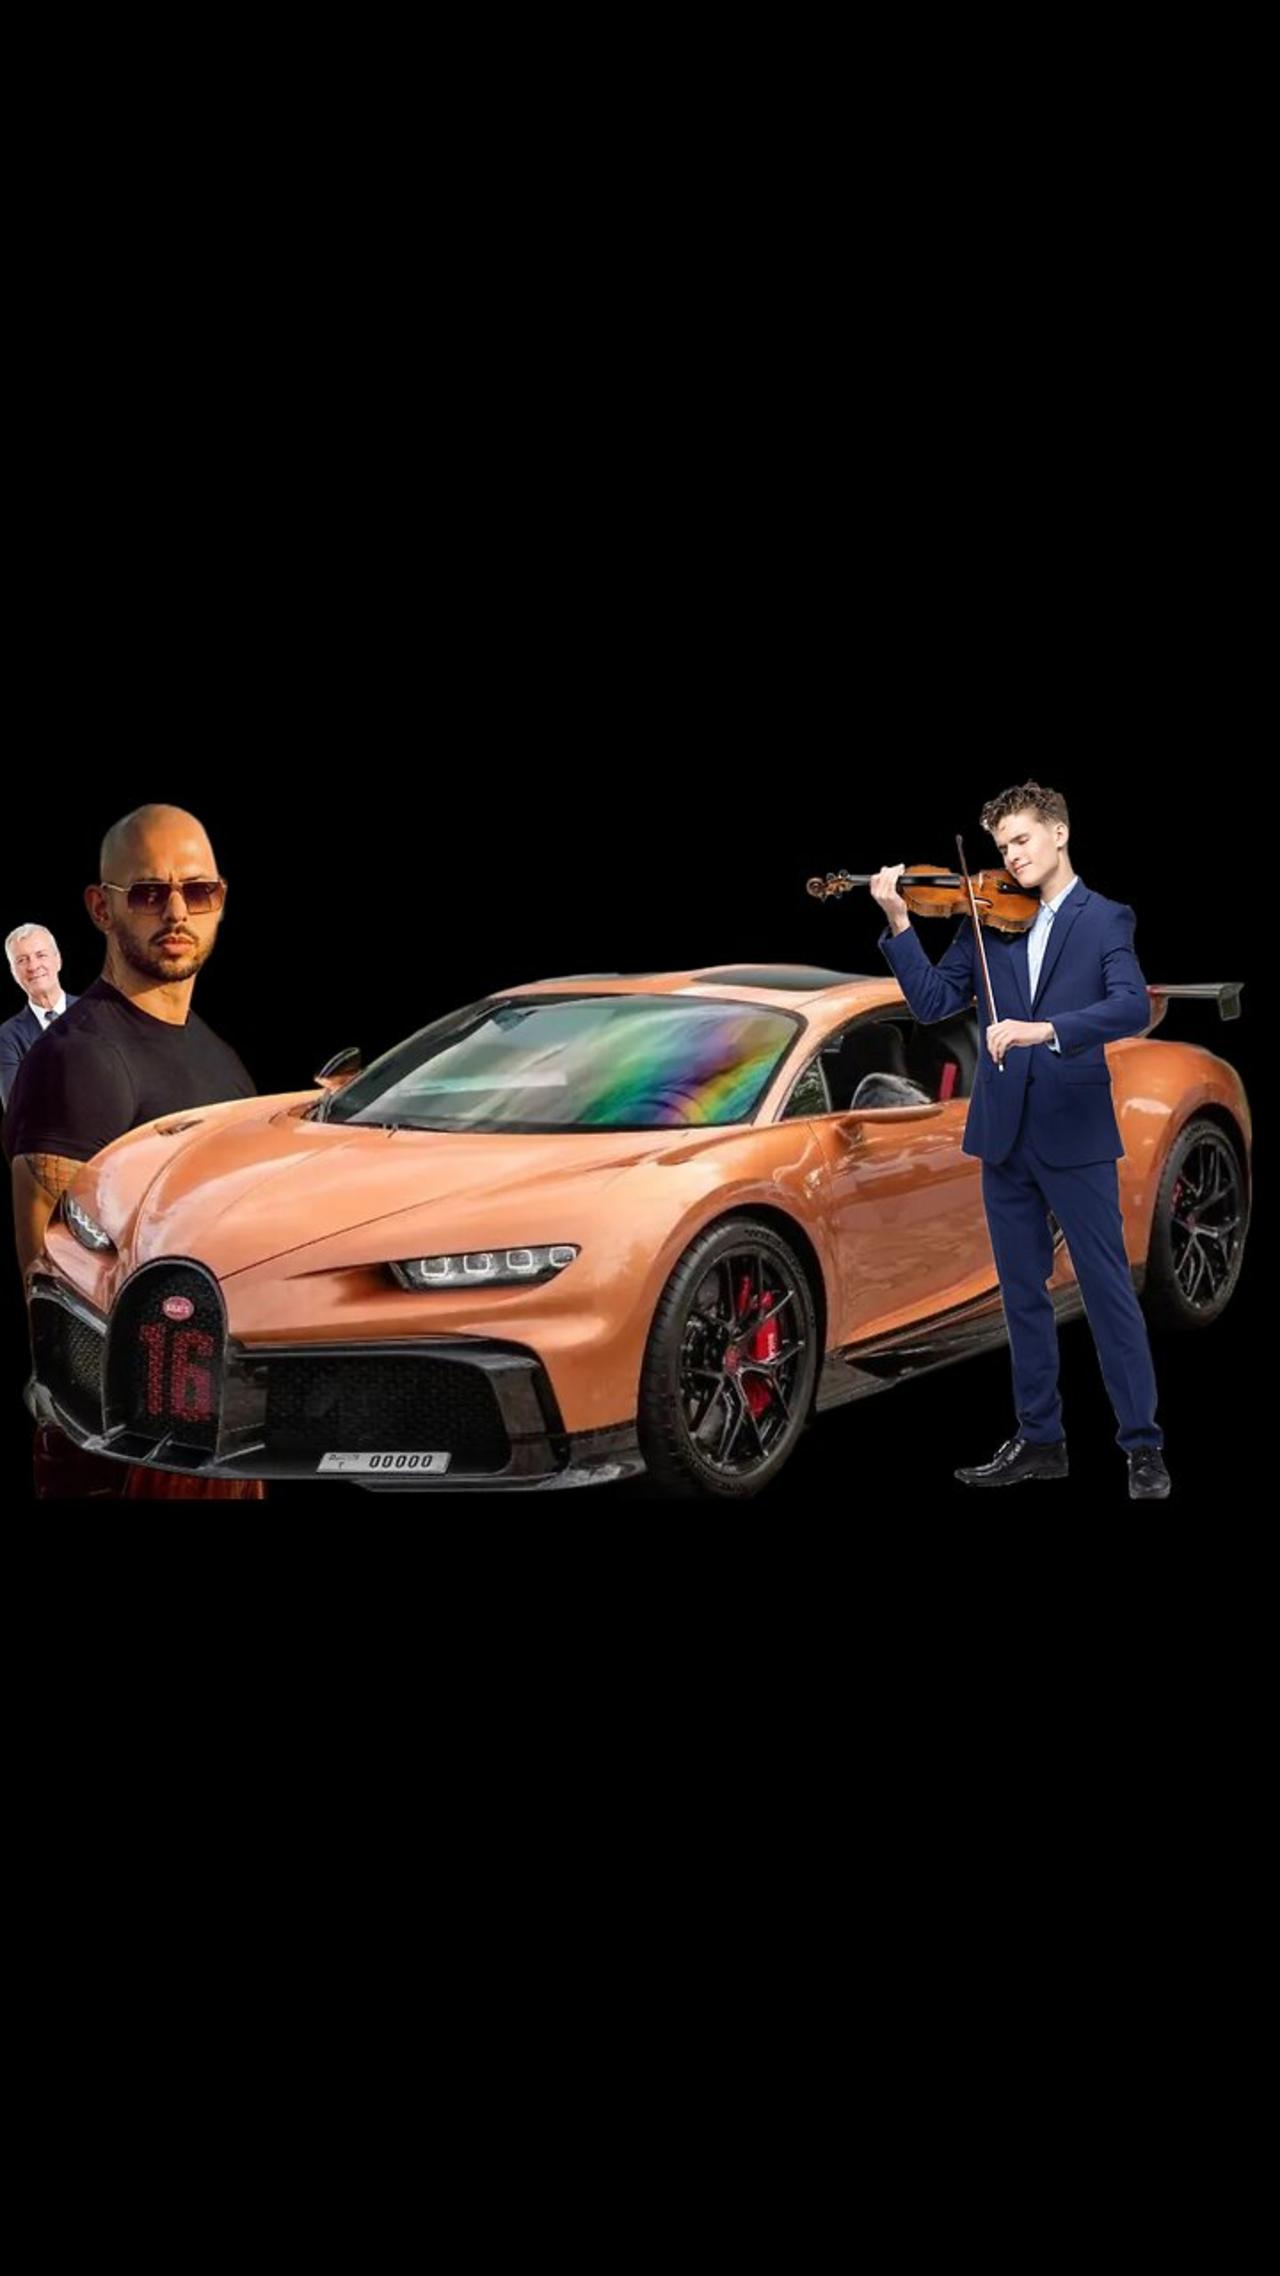 A Bugatti owner let me play Andrew Tate’s Theme song Inside It! #andrewtate #bugatti #violin #theme